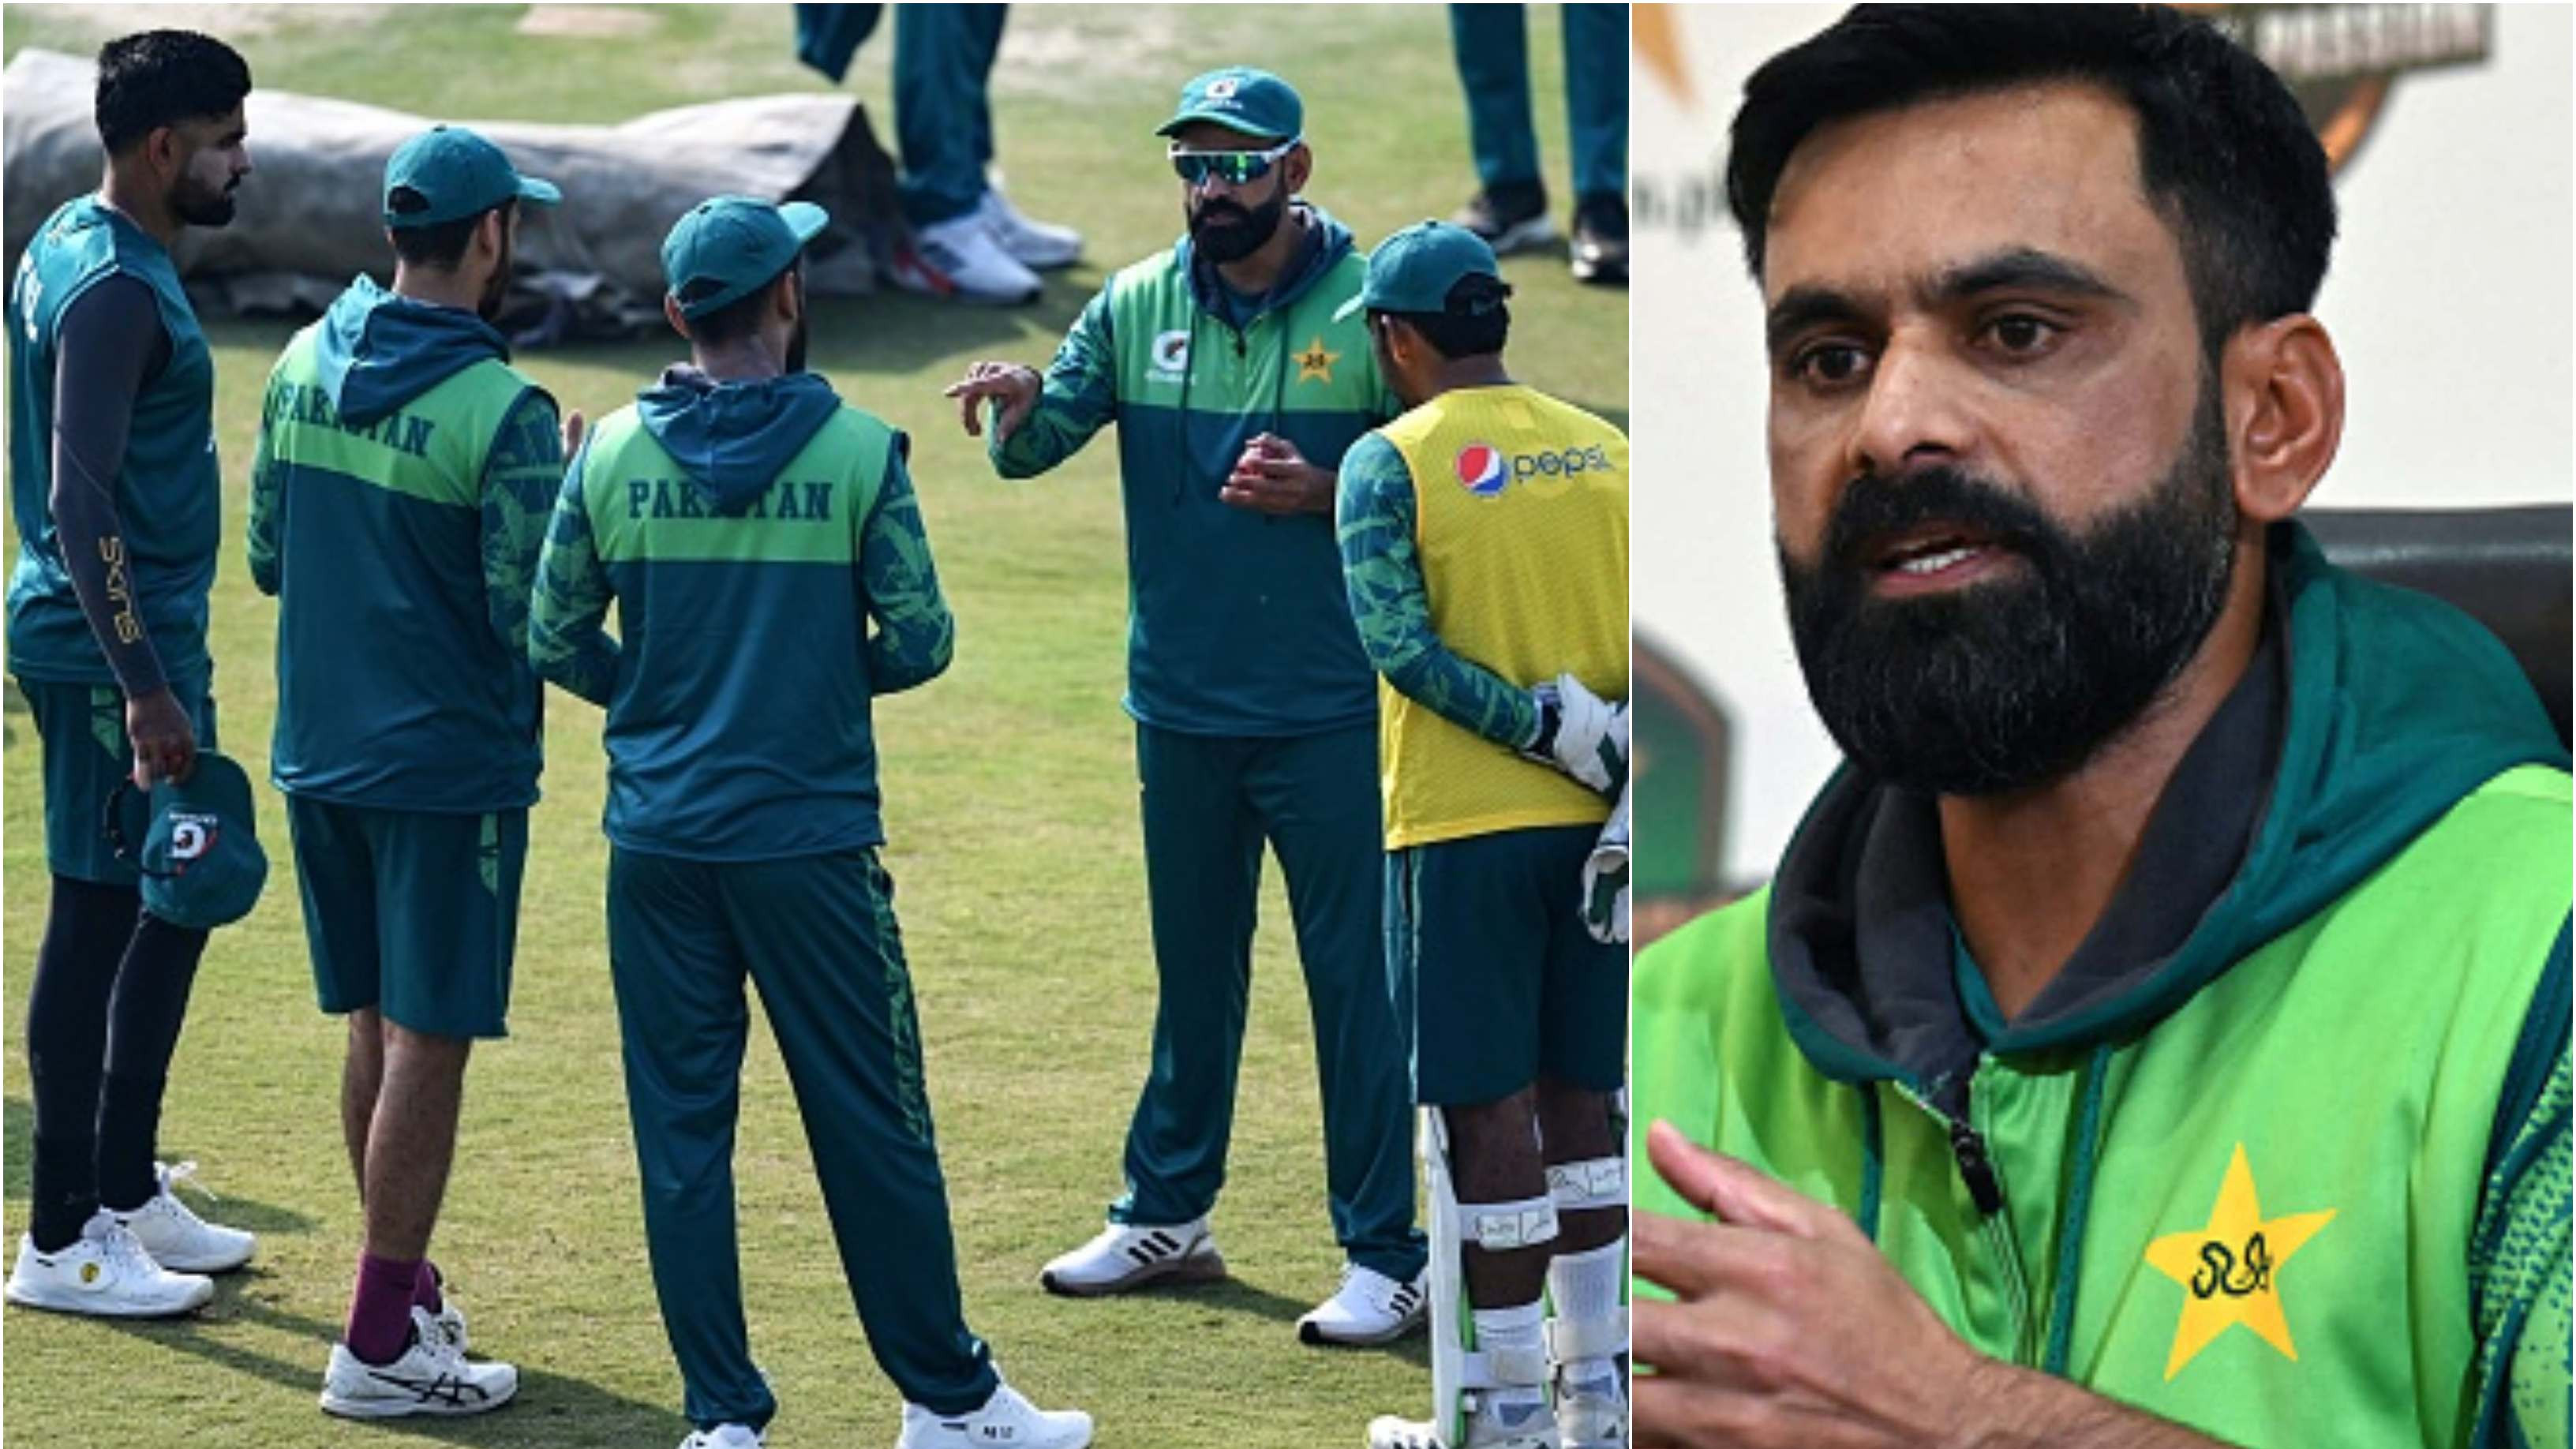 “Some of them couldn’t complete a 2 km trial run,” Mohammad Hafeez slams Pakistan players’ fitness standards